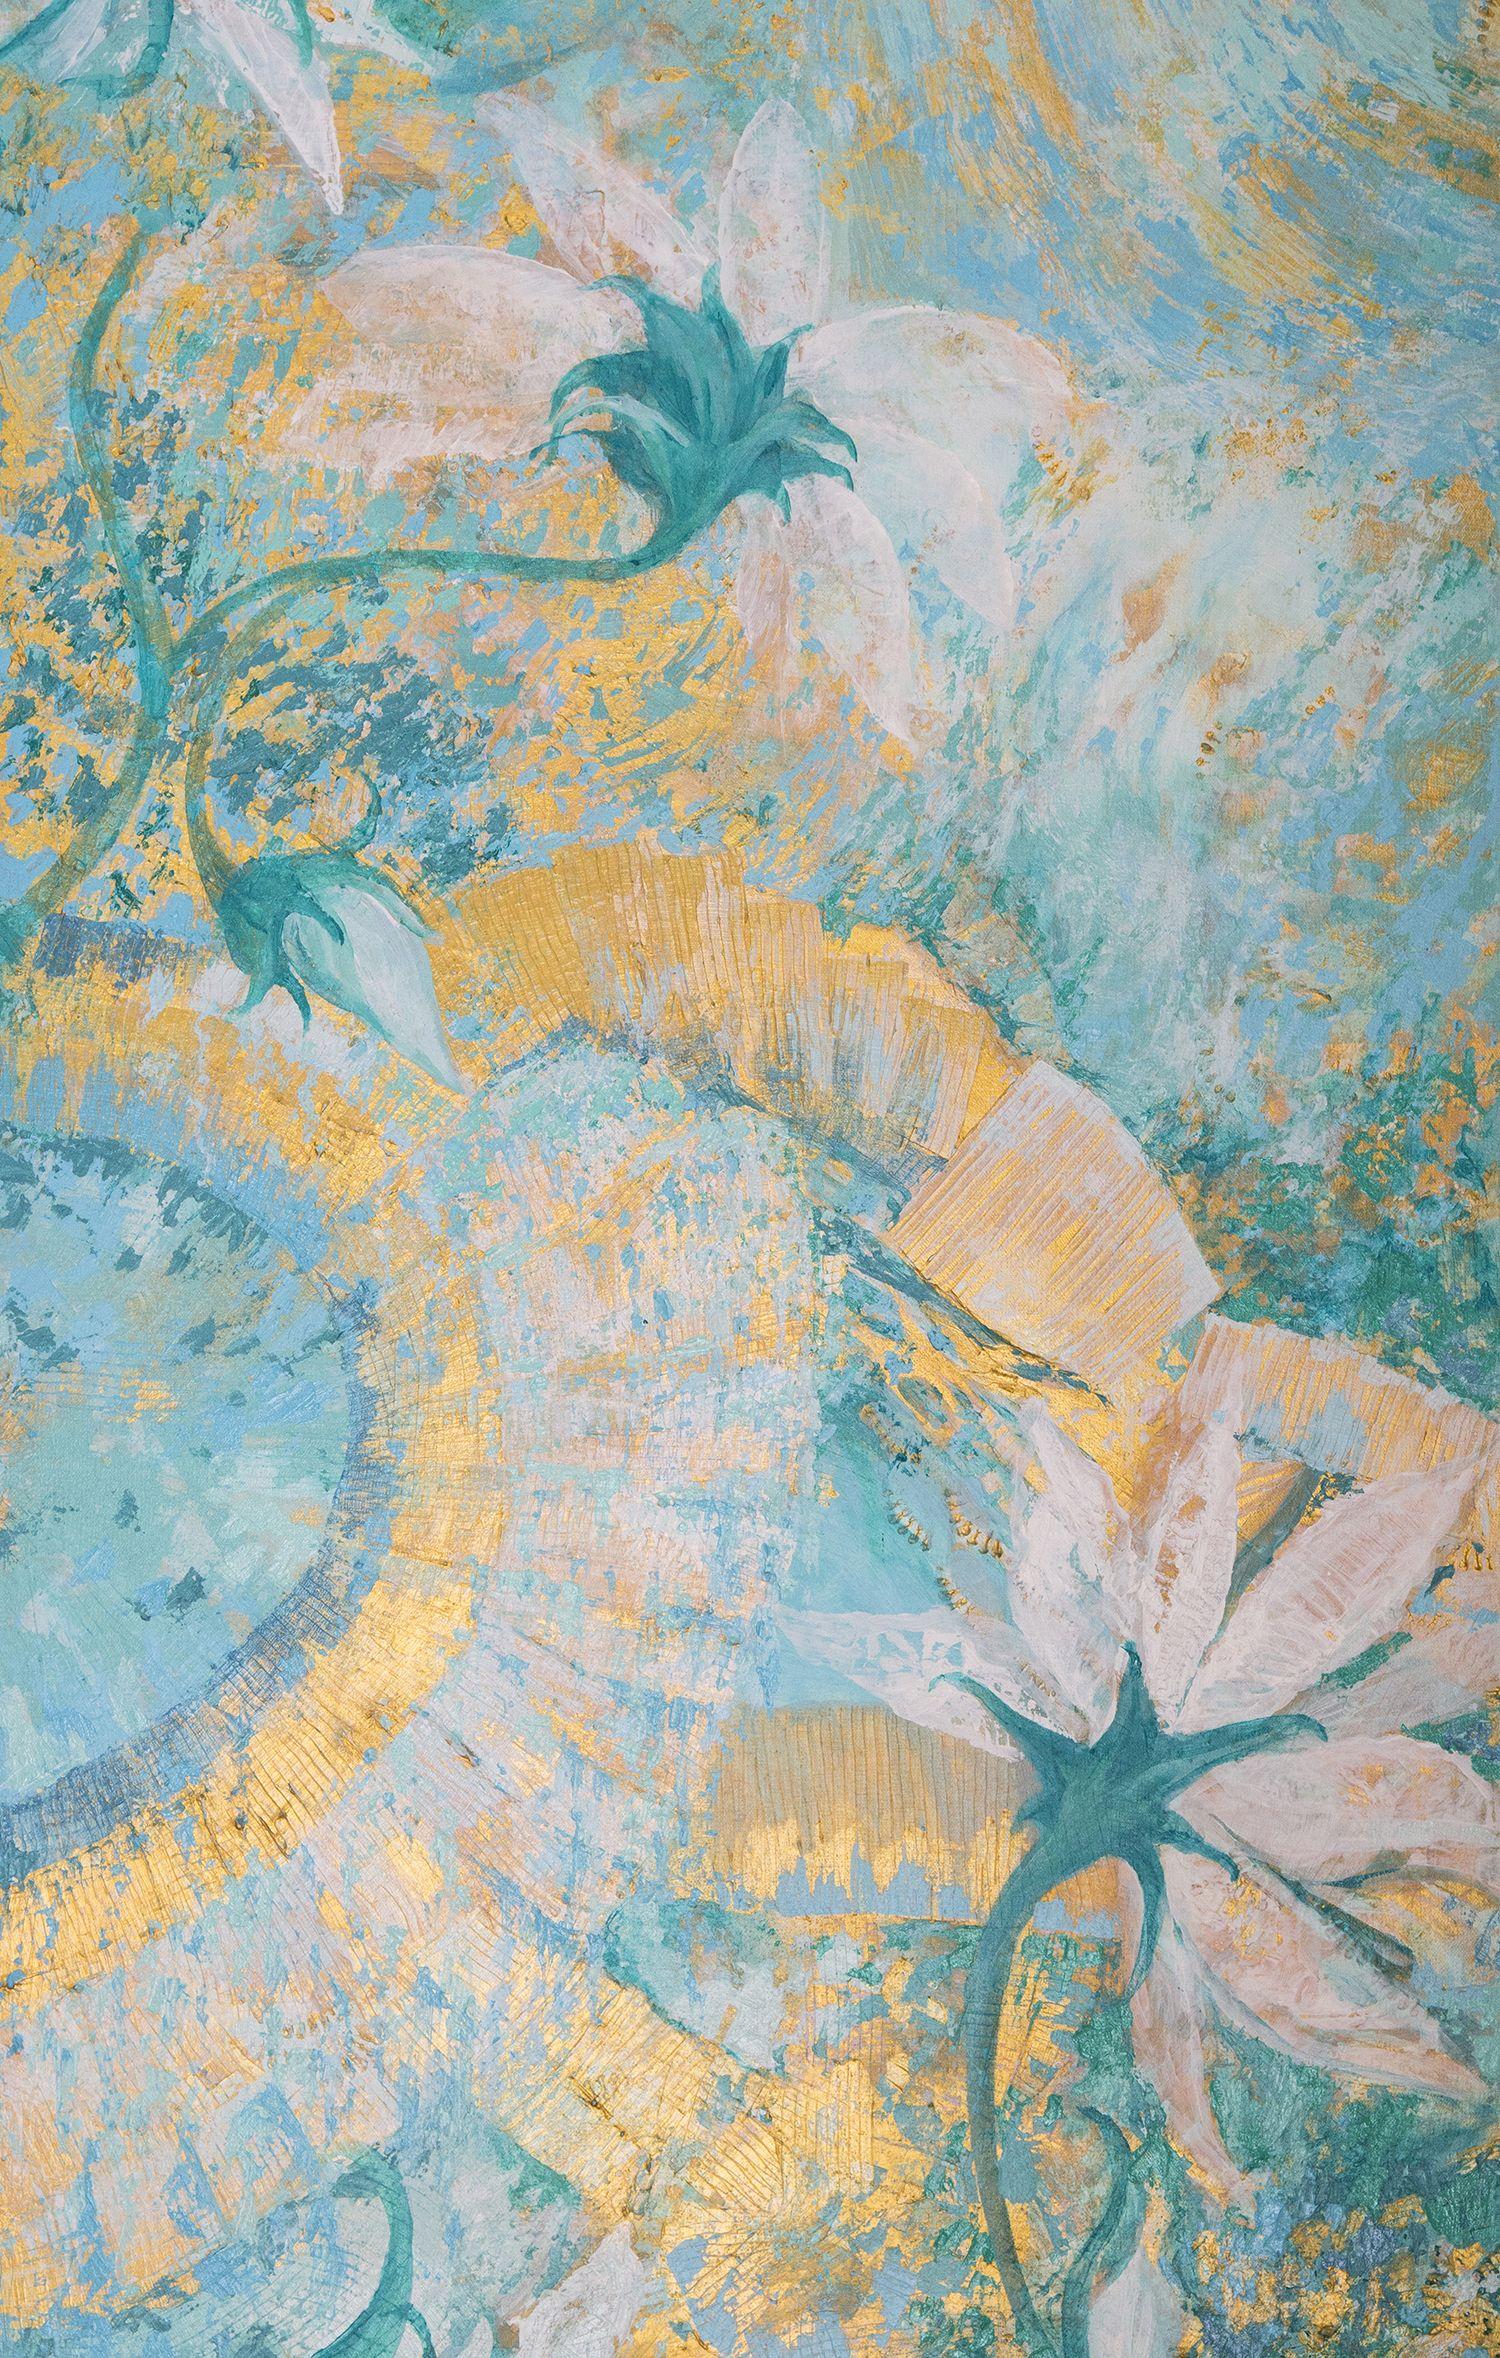 Tahitian Sunrise is full of uplifting energy that will permeate any interior with a feeling of joy. A beautiful mix of Turquoise, variations of Blues and Greens, and Gold Metallic makes this painting a one-of-a-kind experience you will want to